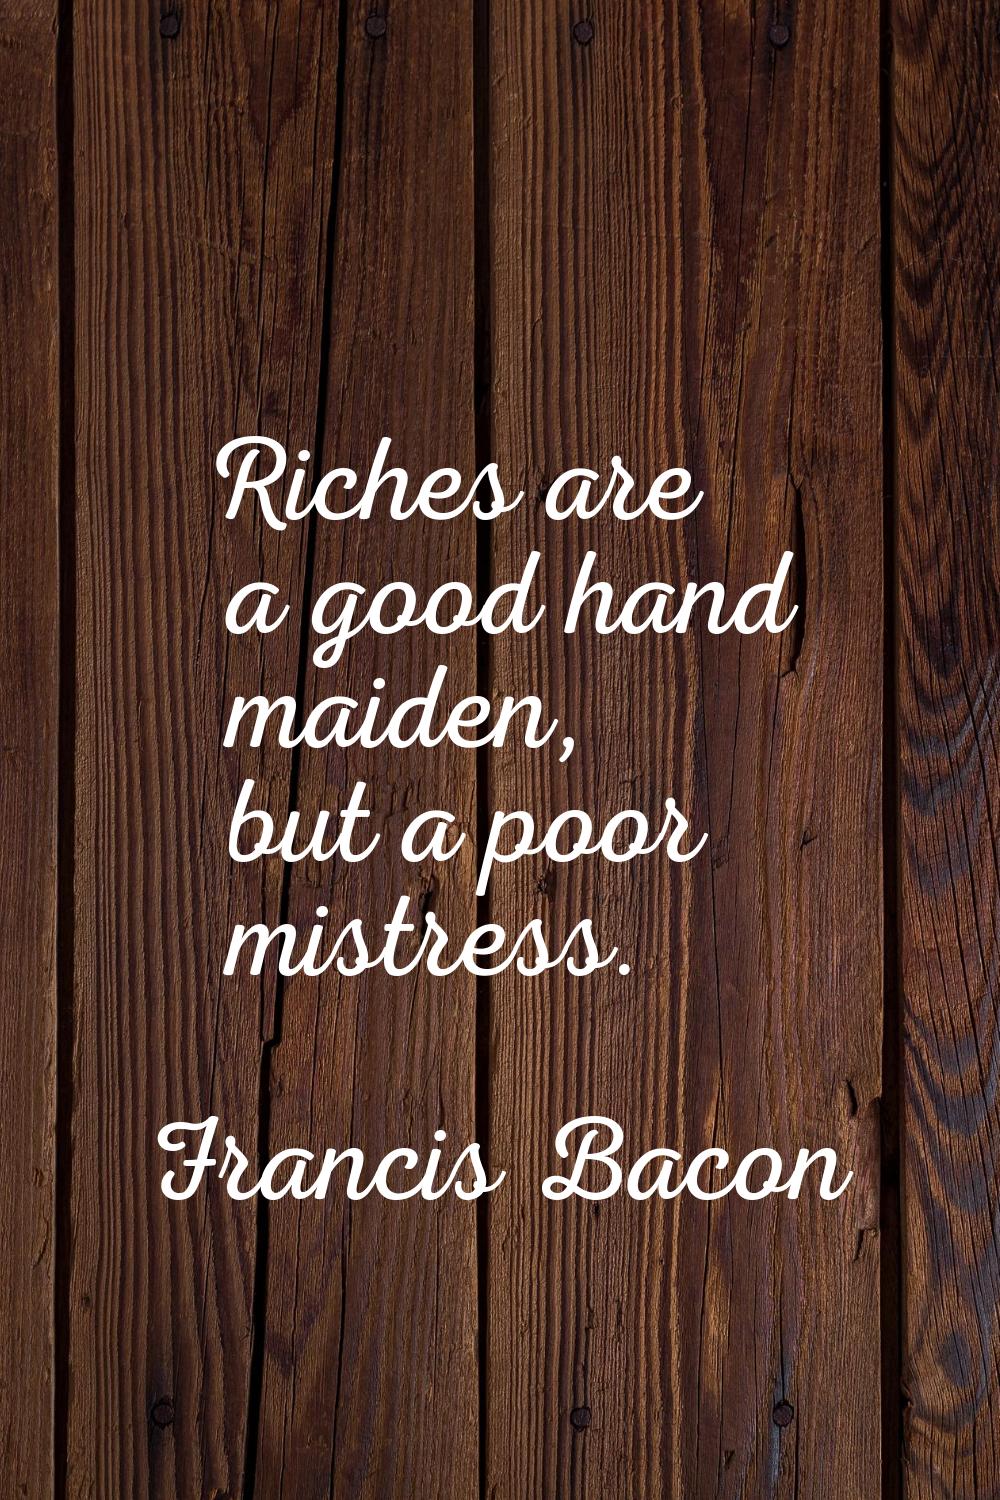 Riches are a good hand maiden, but a poor mistress.